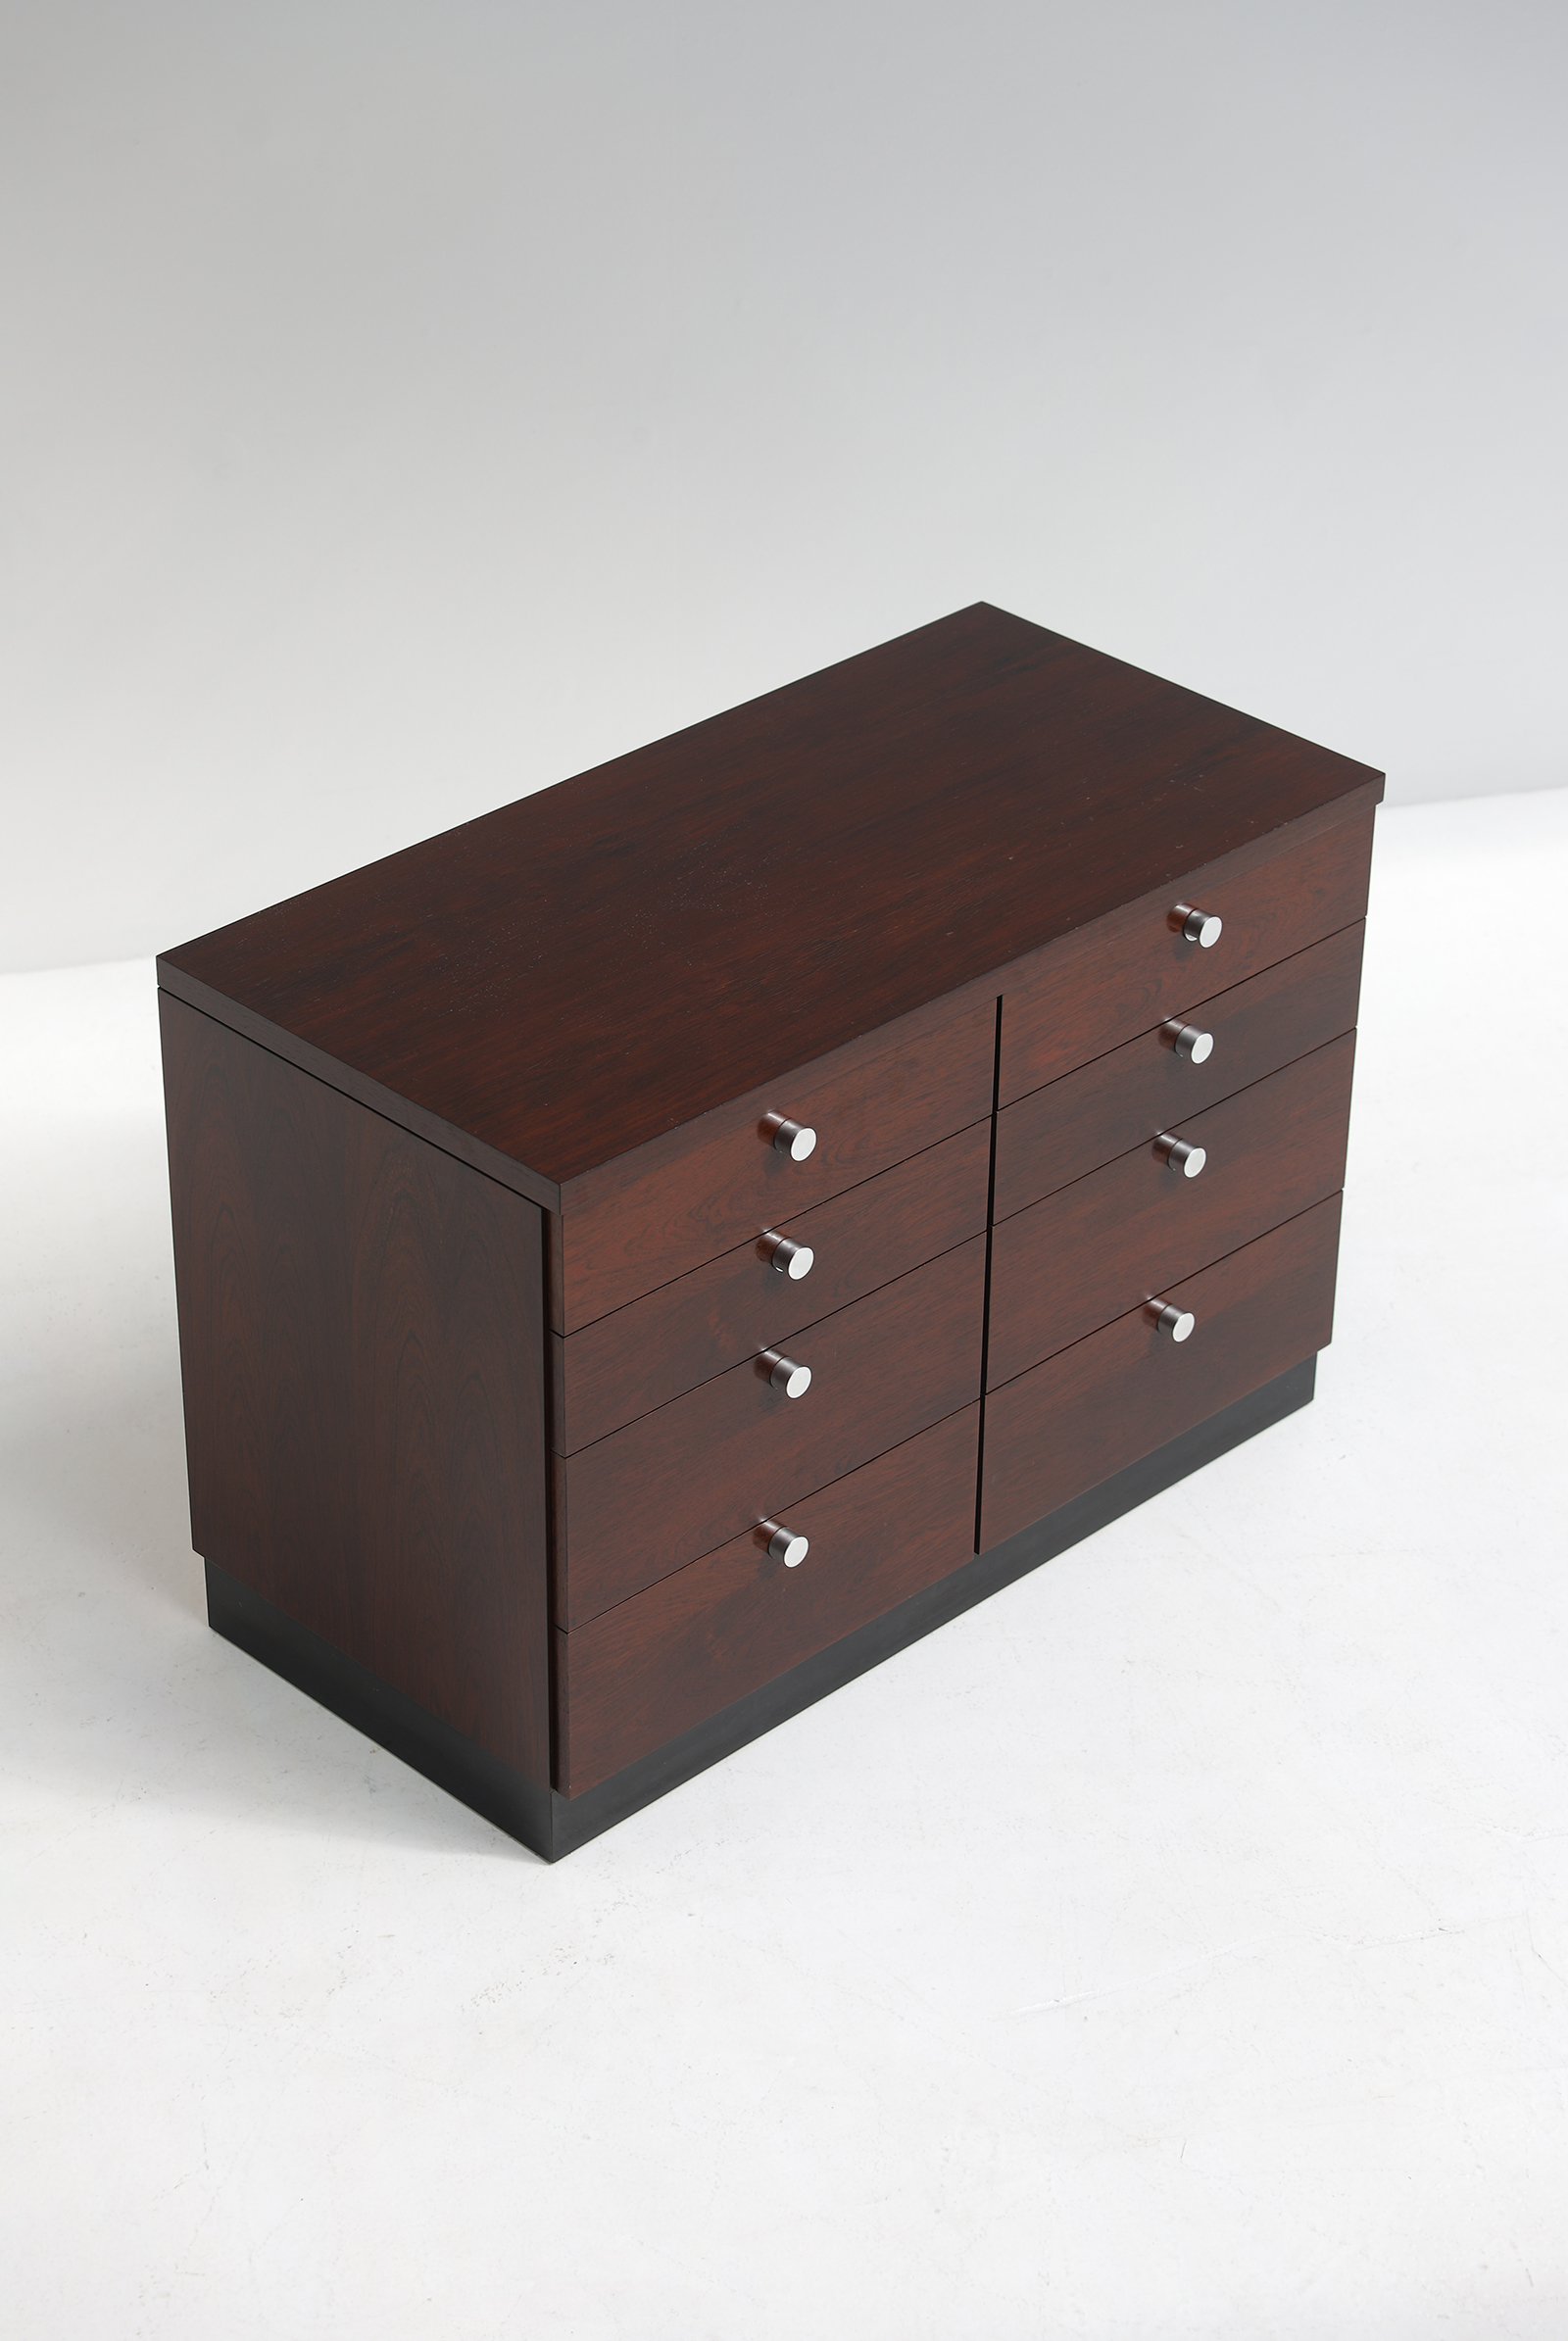 Decorative Alfred Hendrickx commode with drawers 1970simage 10